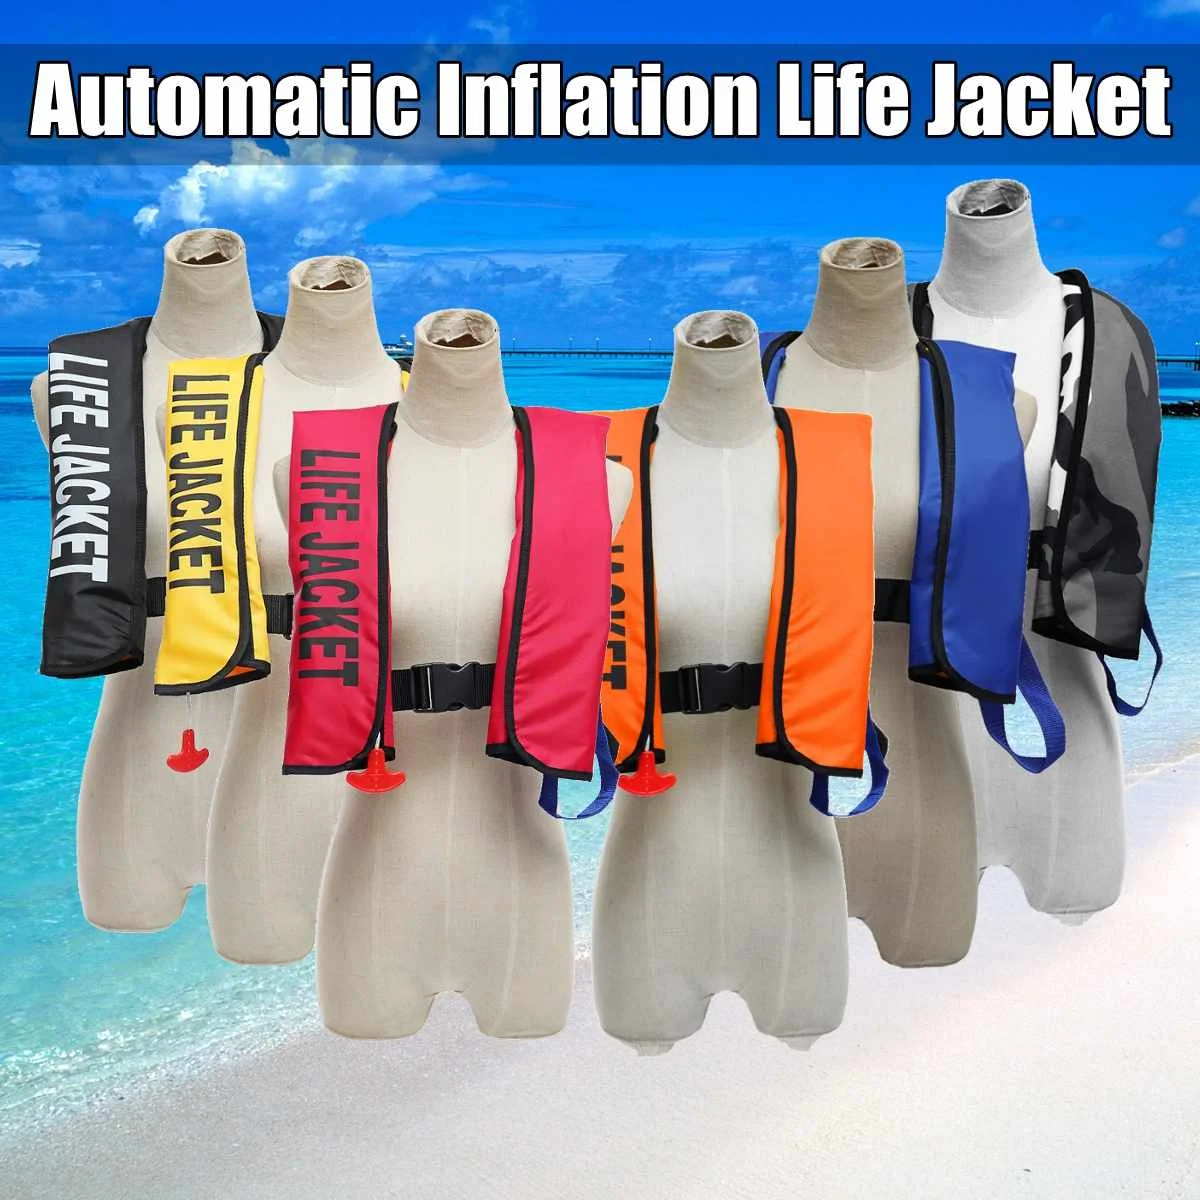 New Adult Automatic Inflatable Life Jacket Inflation 150N PFD Survival Aid Vest 